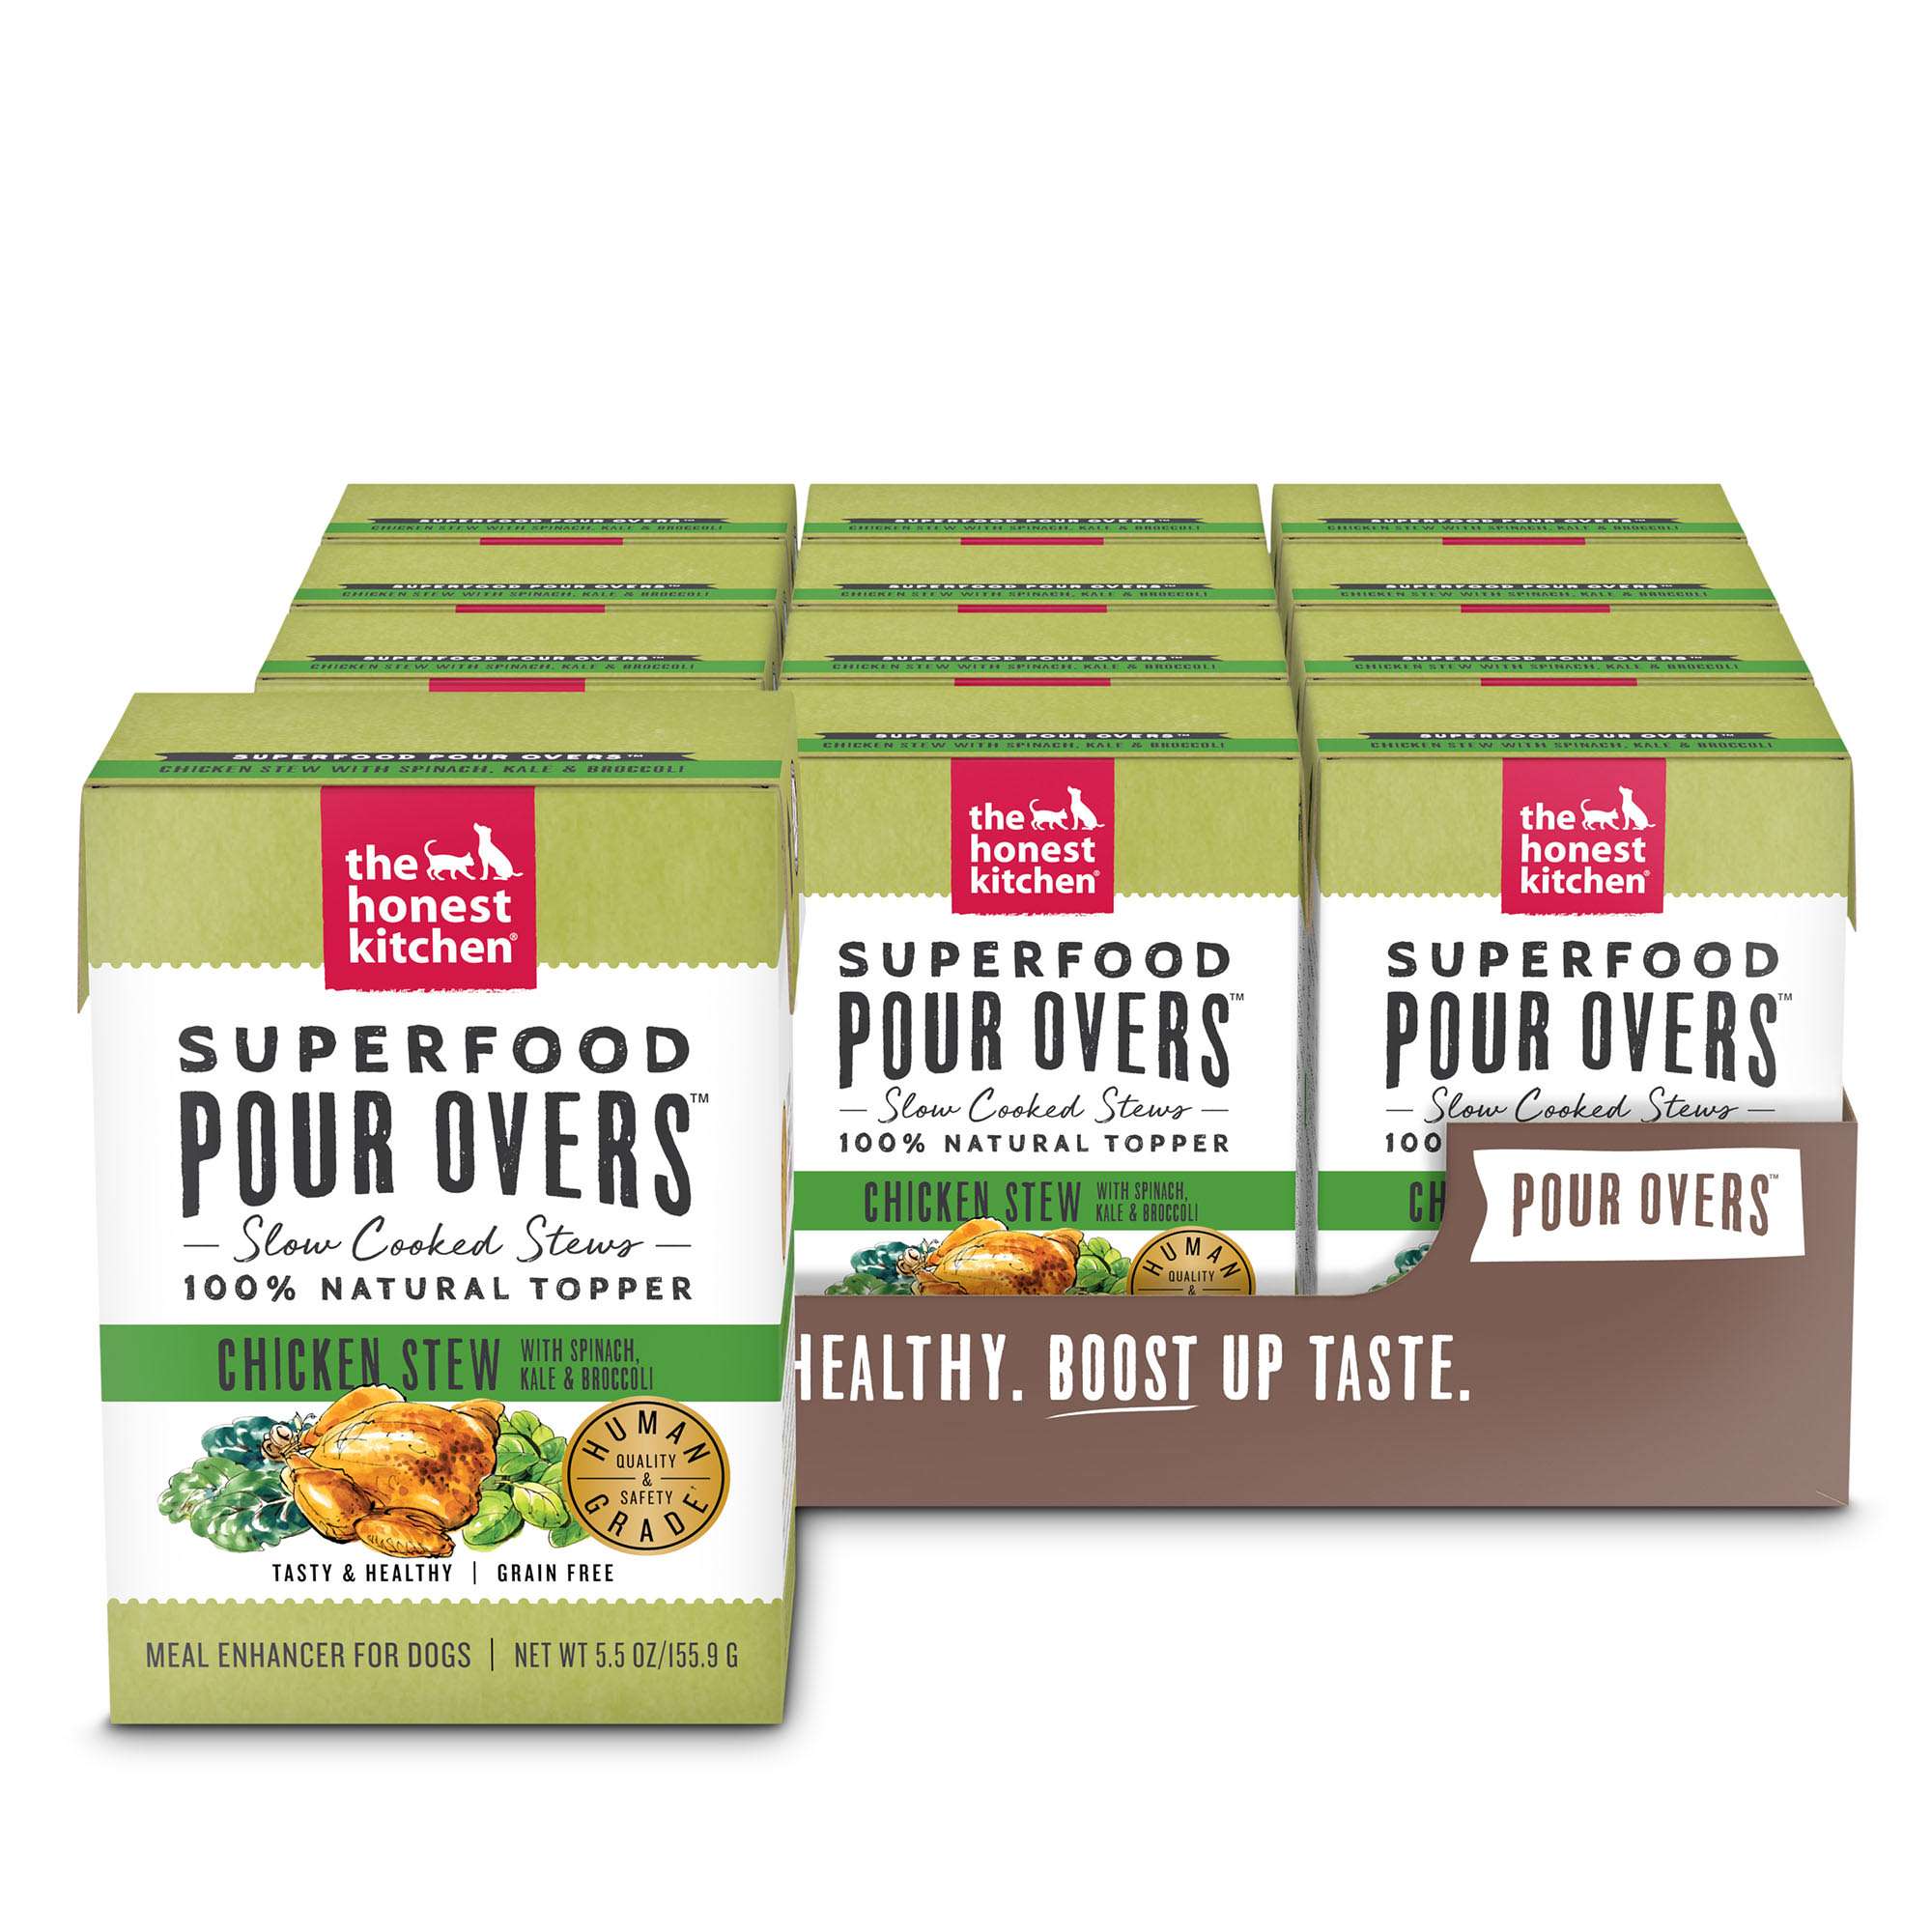 The Honest Kitchen Superfood Pour Overs: Chicken Stew with Spinach, Kale & Broccoli Wet Dog Food Topper, 5.5 oz., Case of 12, 12 X 5.5 OZ